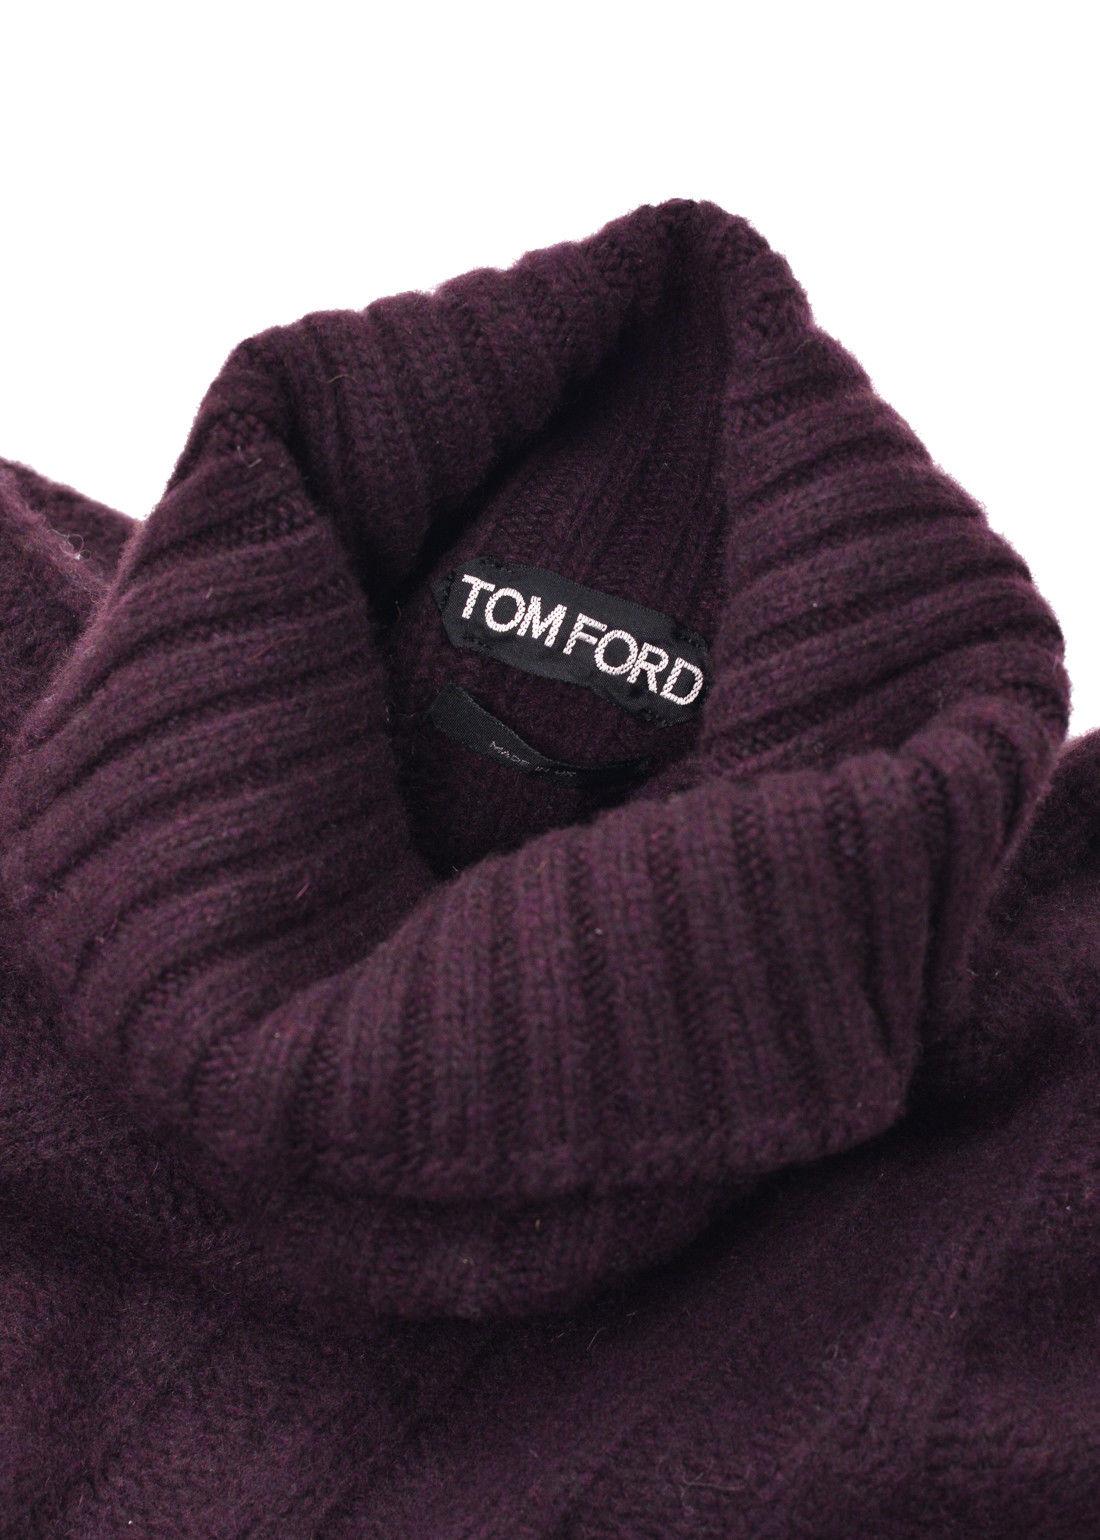 Tom Ford Mens Cashmere Maroon Rib Knit Turtleneck Sweater Sz IT46/US36~RTL $1450 In New Condition For Sale In Brooklyn, NY